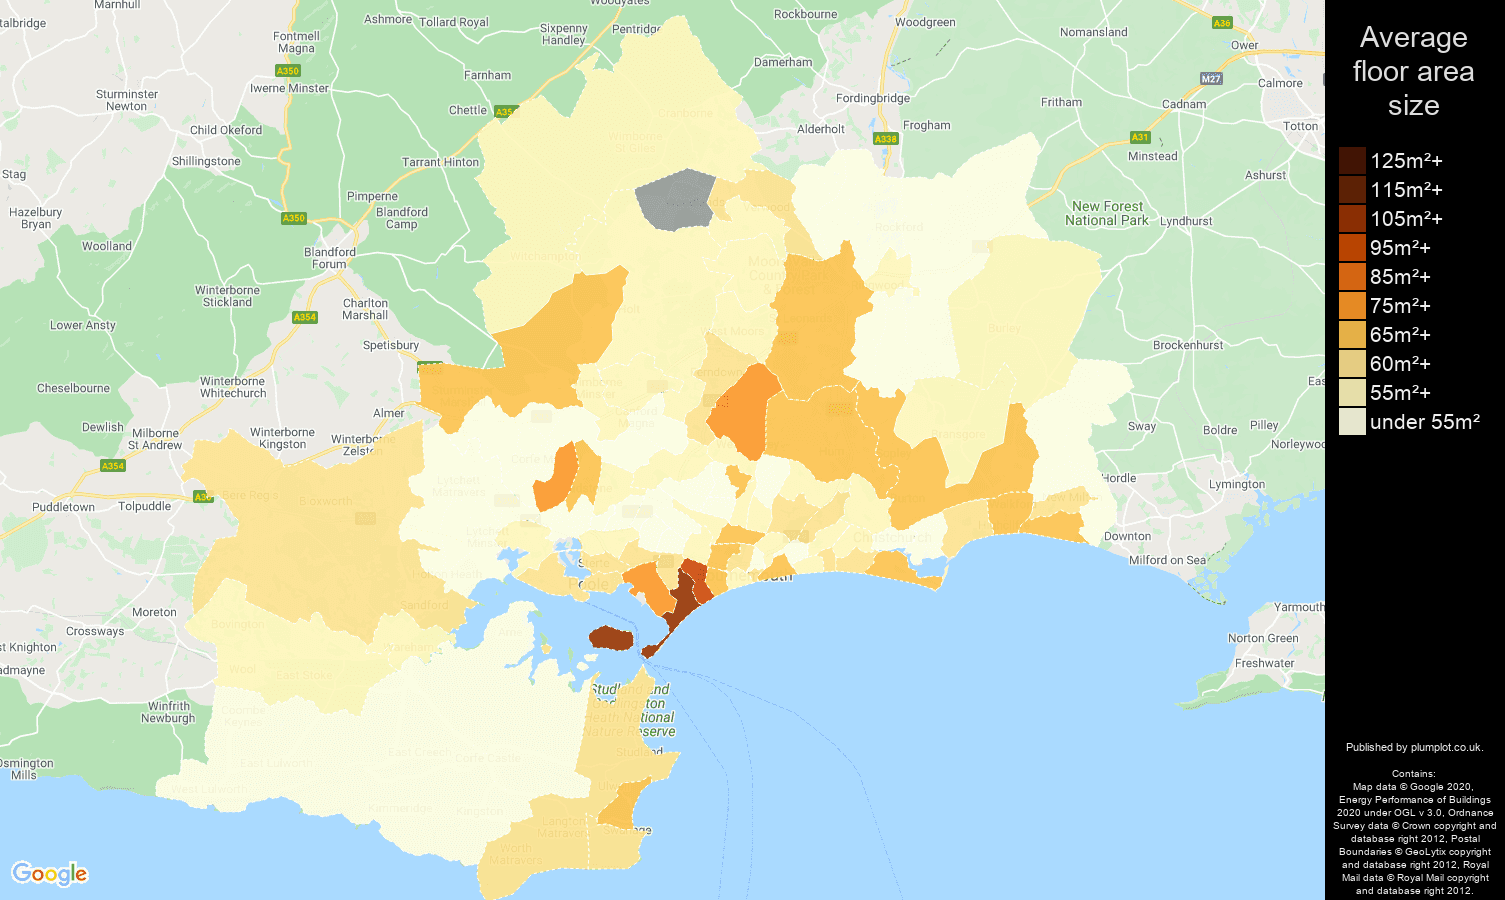 Bournemouth map of average floor area size of flats